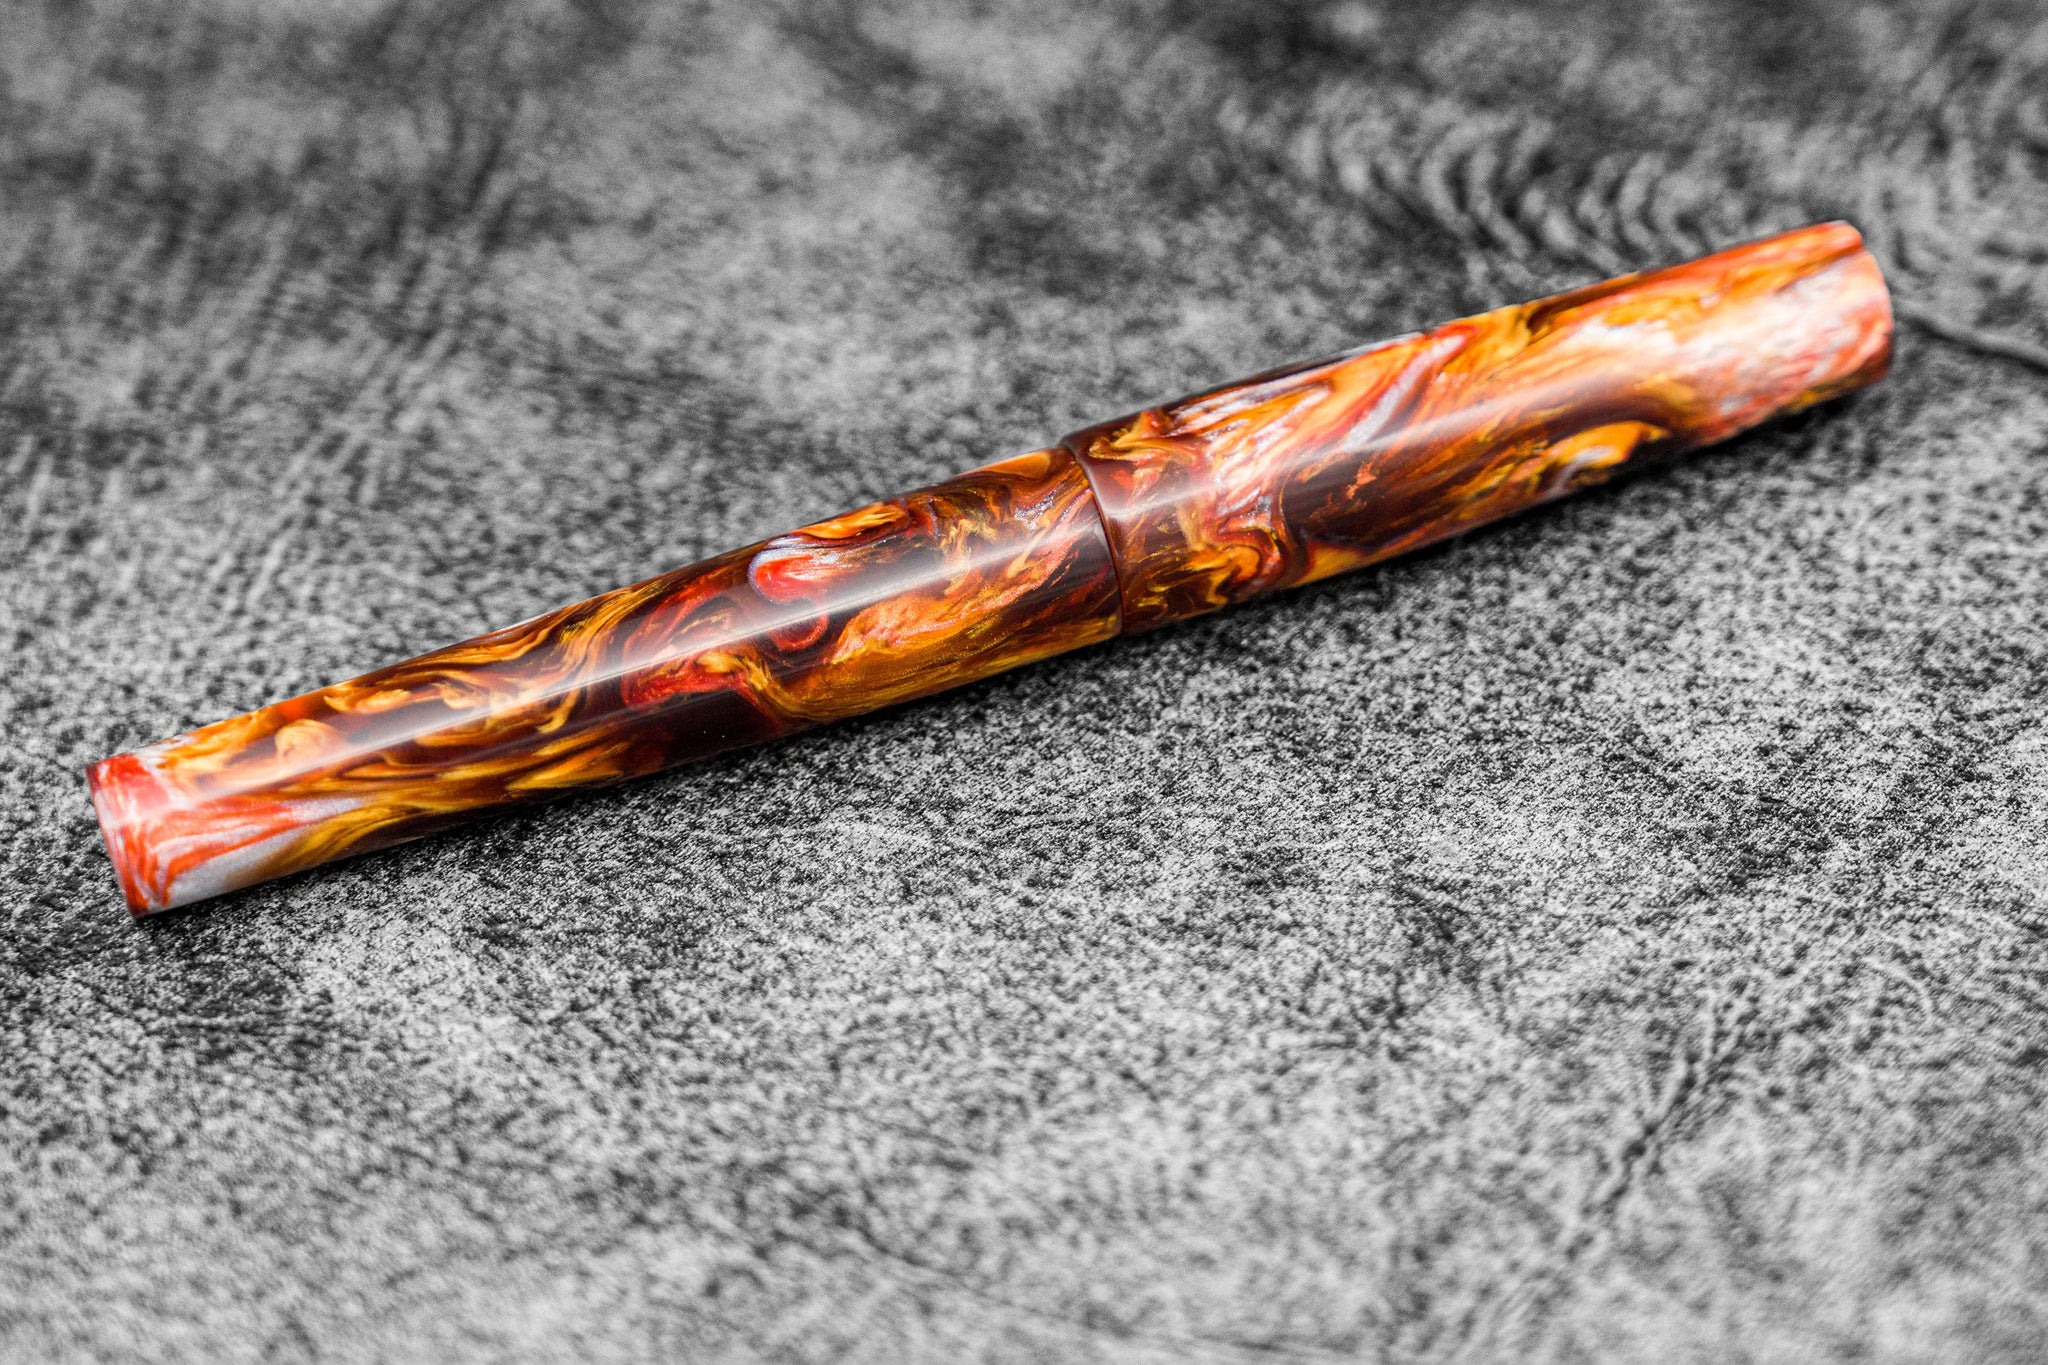 Padauk Pen With 24kt Gold Fittings - Handcrafted Wood Ink Pen By Whidd –  Whidden's Woodshop